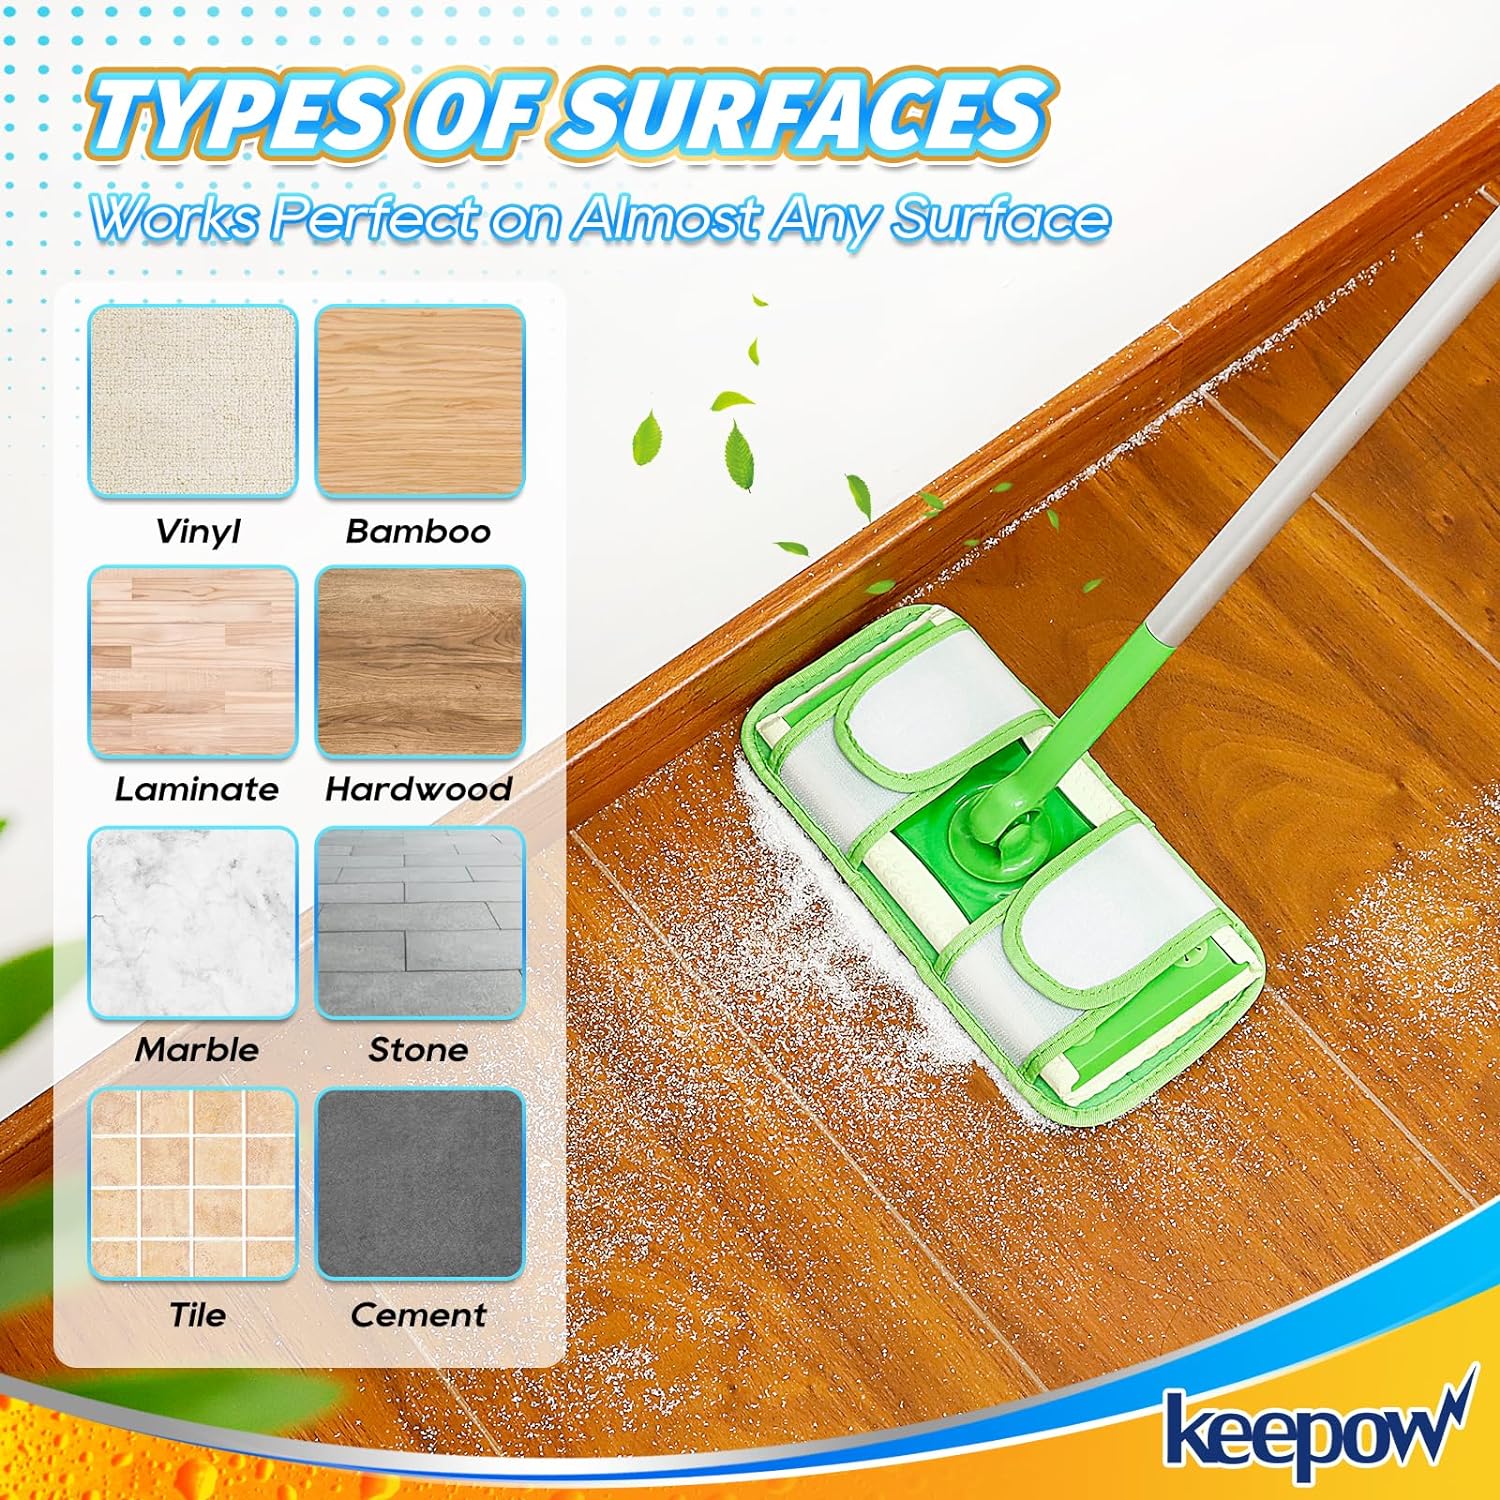 KEEPOW 5701M Dry Sweeping Cloths for Swiffer Sweeper, Reusable Washable Microfiber Mop Pads Refills